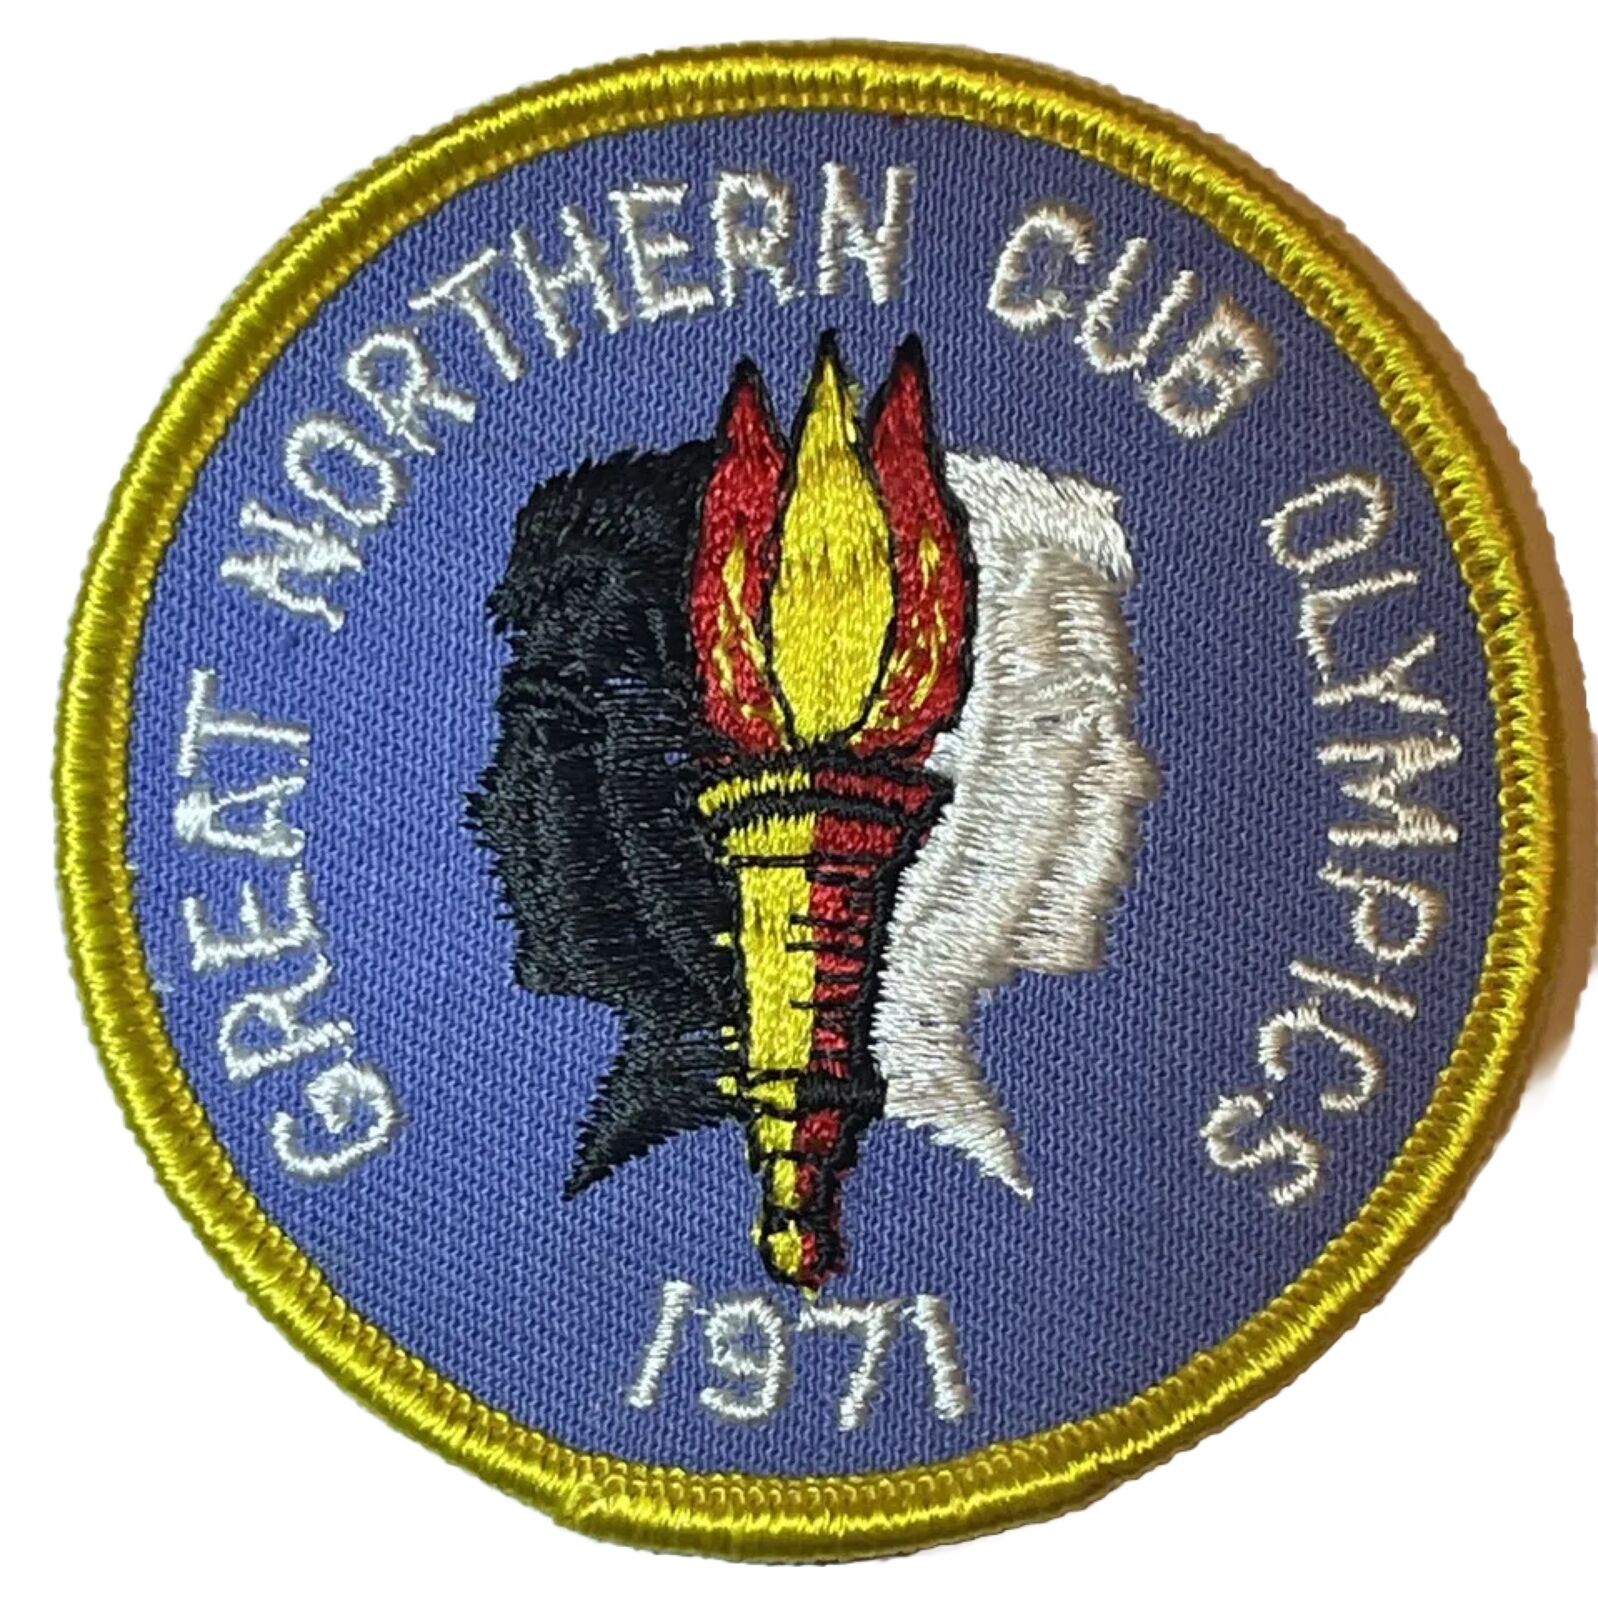 Great Northern District Patch Cub Olympics Boy Scouts BSA Embroidered Badge